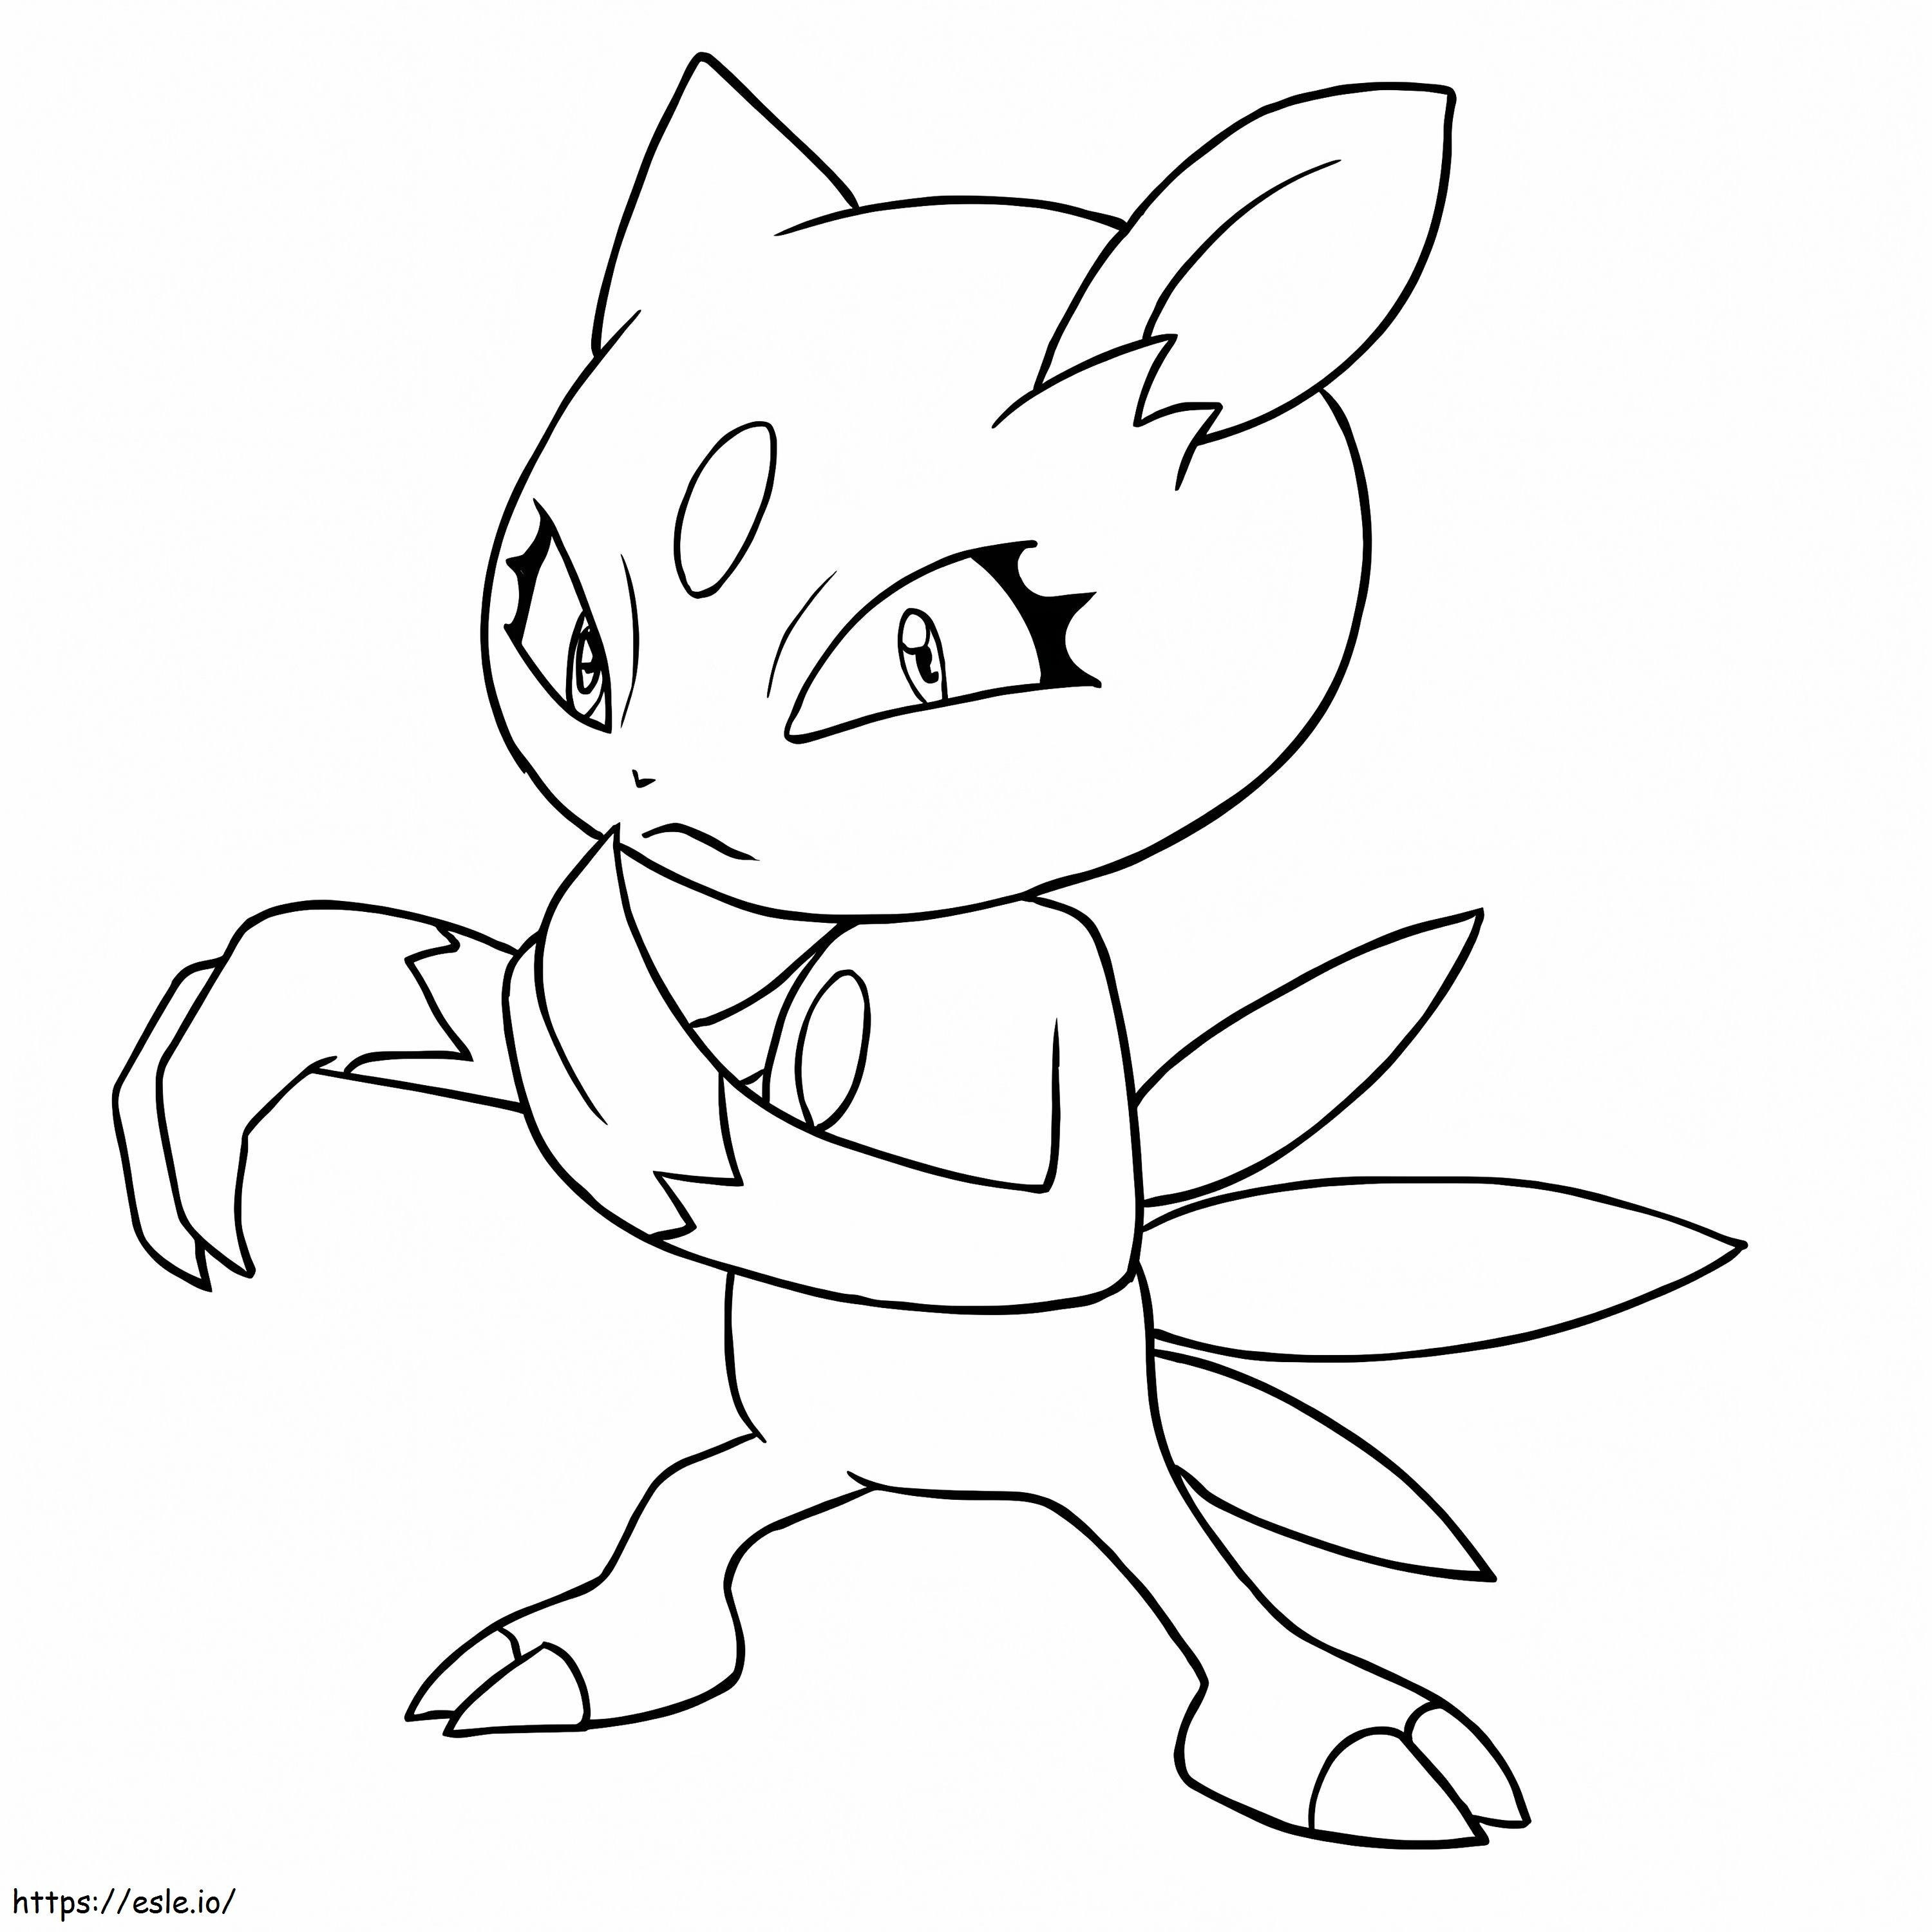 Sneasel Pokemon 3 coloring page